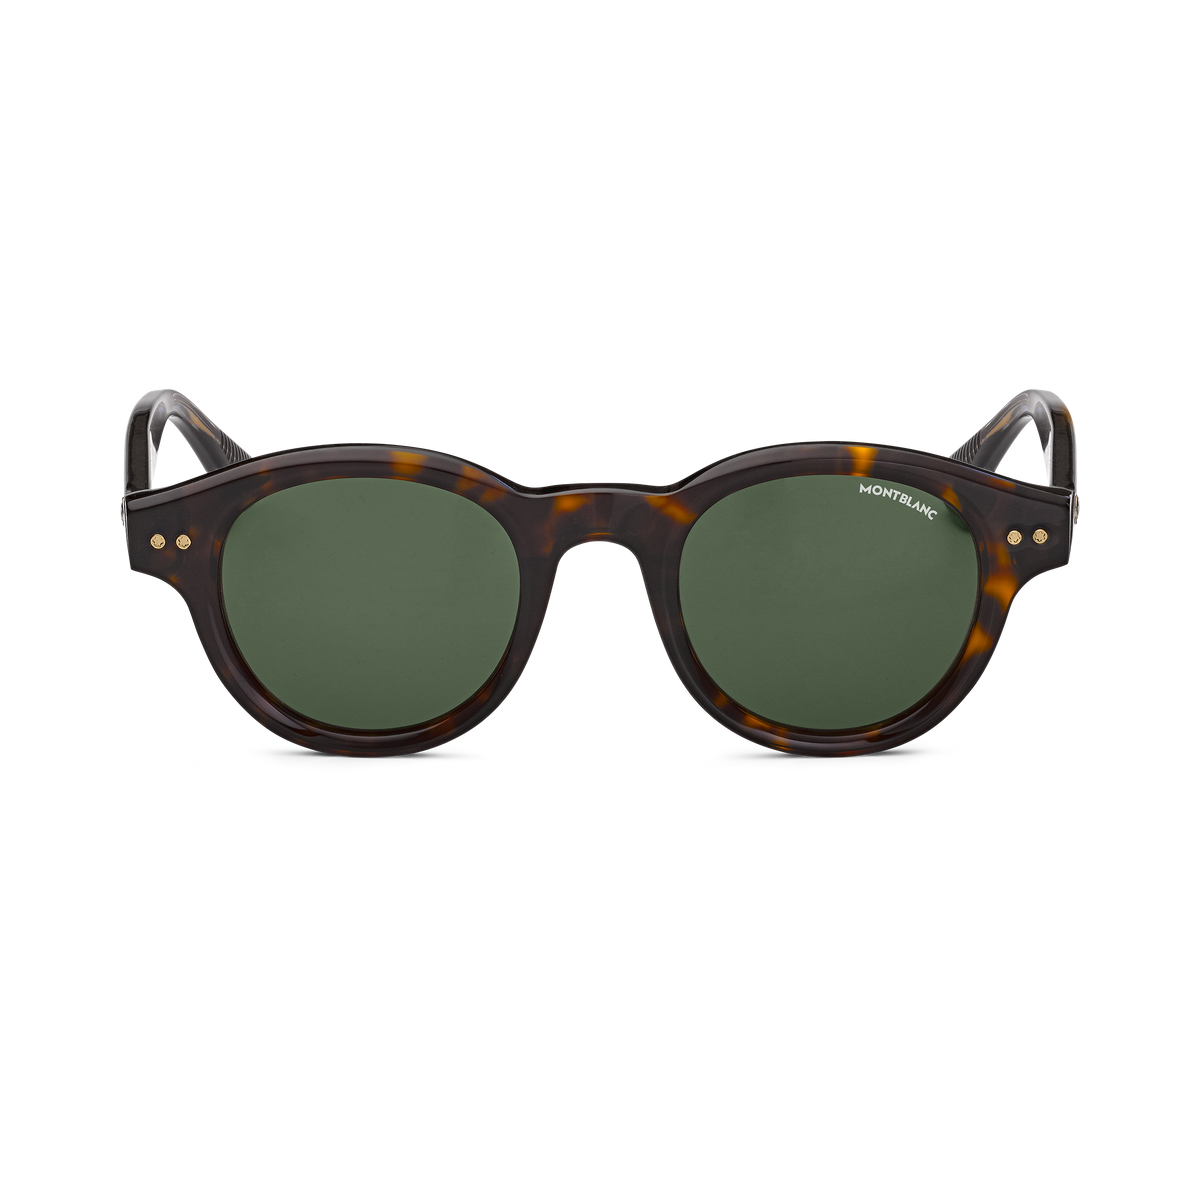 Round Sunglasses with Havana-Colored Acetate Frame